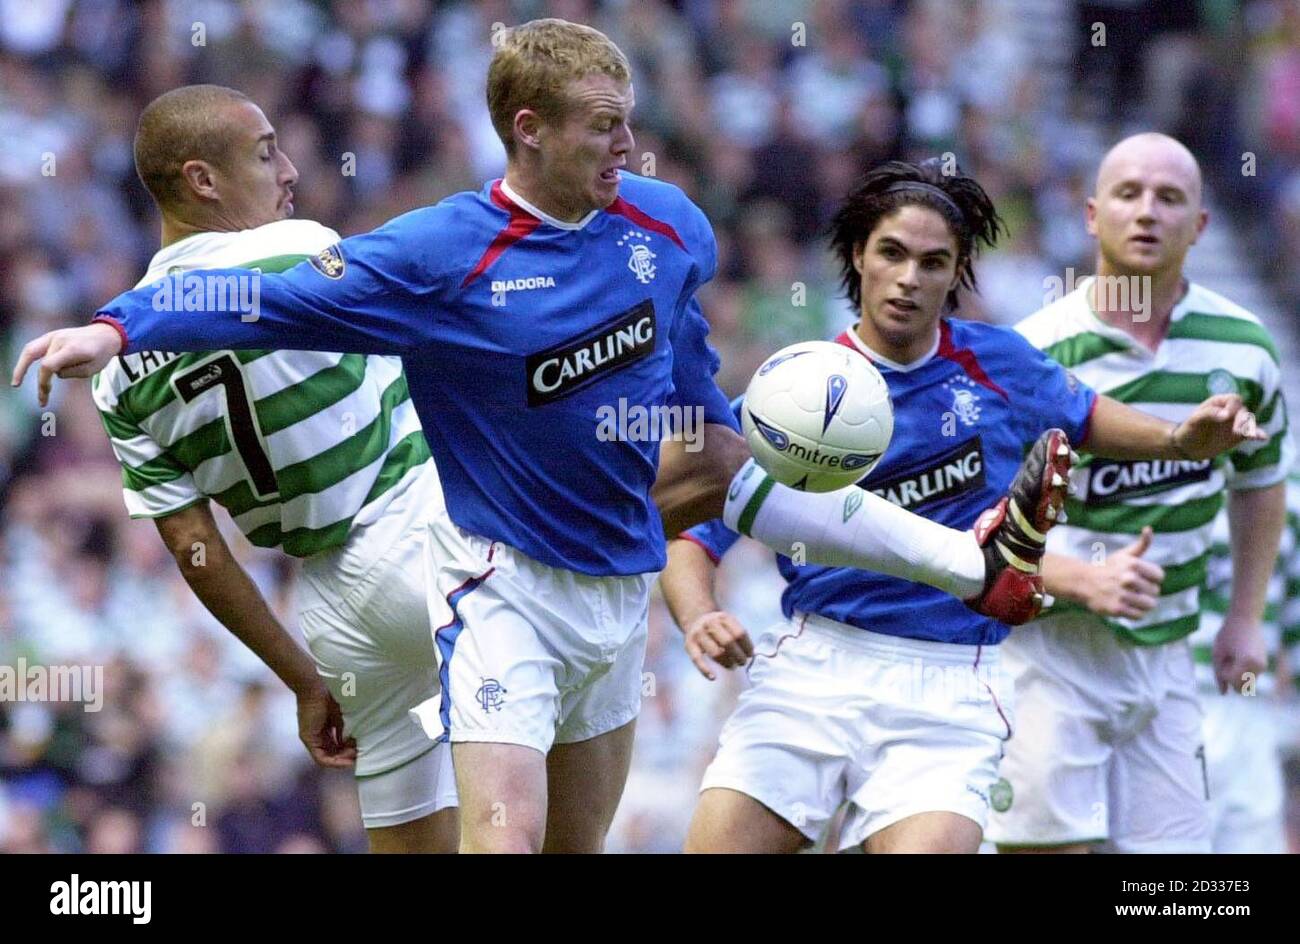 EDITORIAL USE ONLY:  Celtic's Henrik Larsson (left) challenges Rangers' Michael Ball with Mickel Arteta (second right) and John Hartson (right) lookiing on during their Bank of Scotland Premier League match at the Ibrox Stadium, Glasgow. Celtic won 1-0. Stock Photo